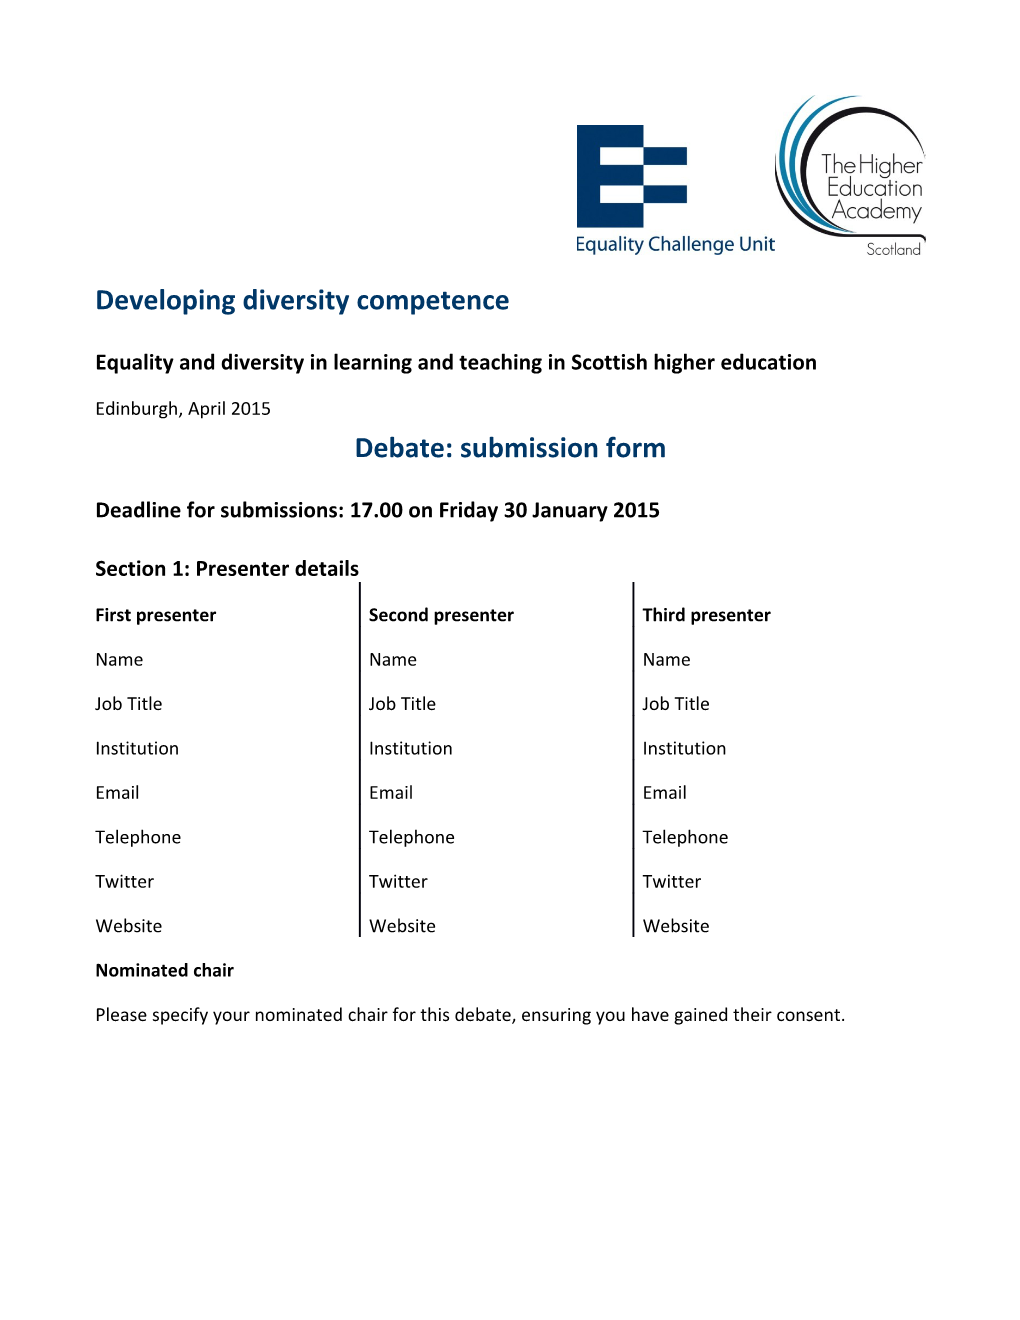 Equality and Diversity in Learning and Teaching in Scottish Higher Education